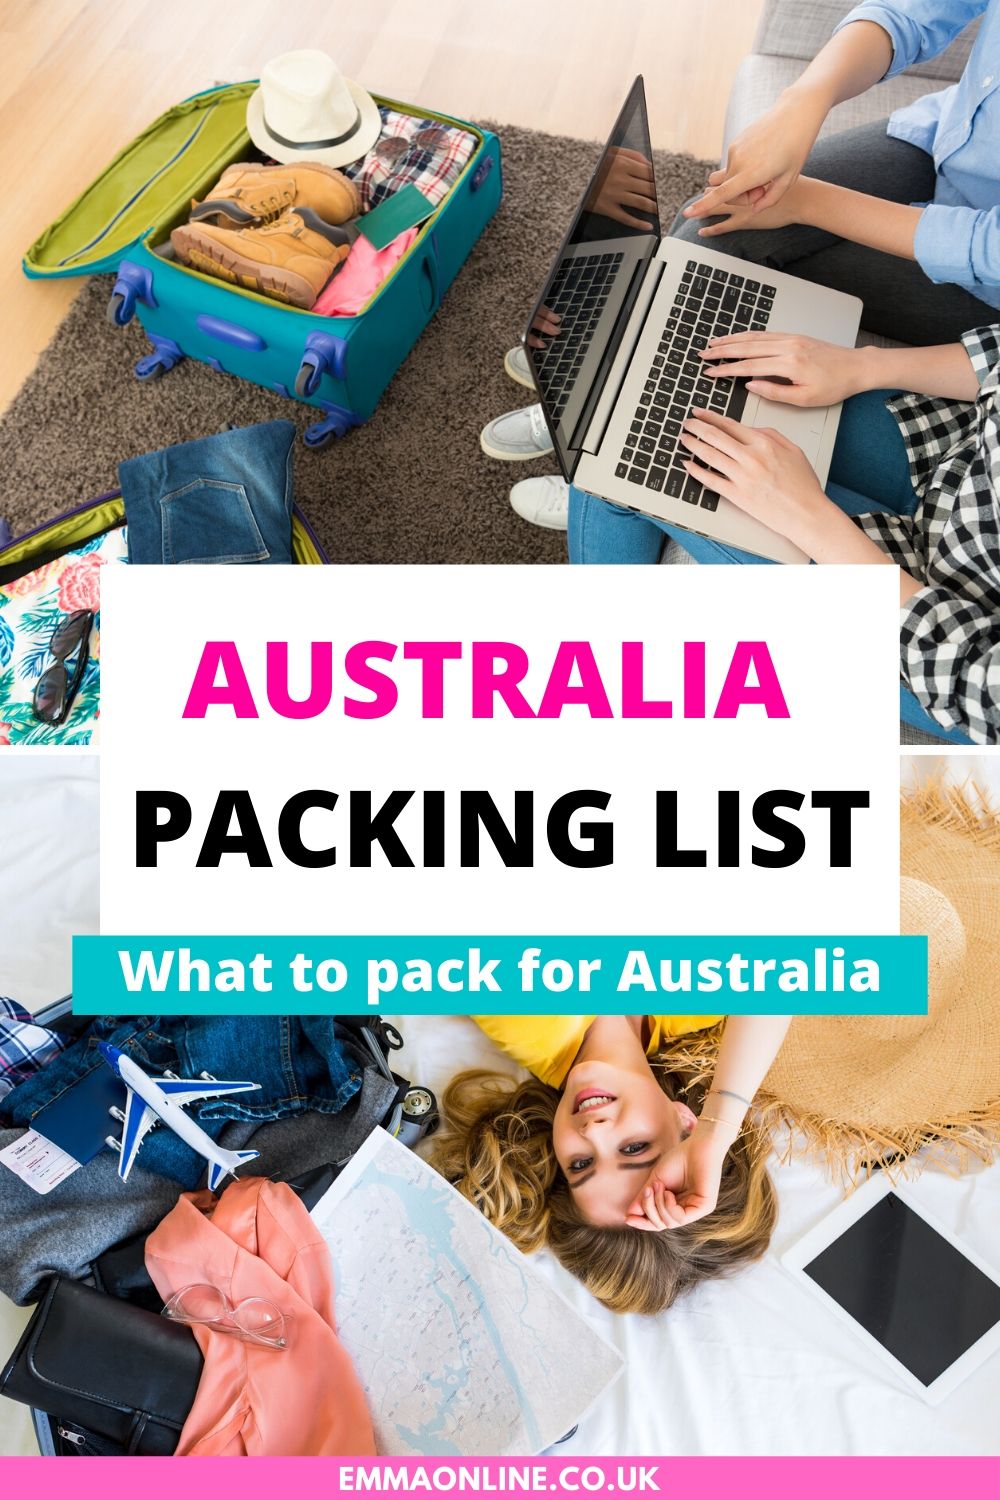 travelling australia what to pack